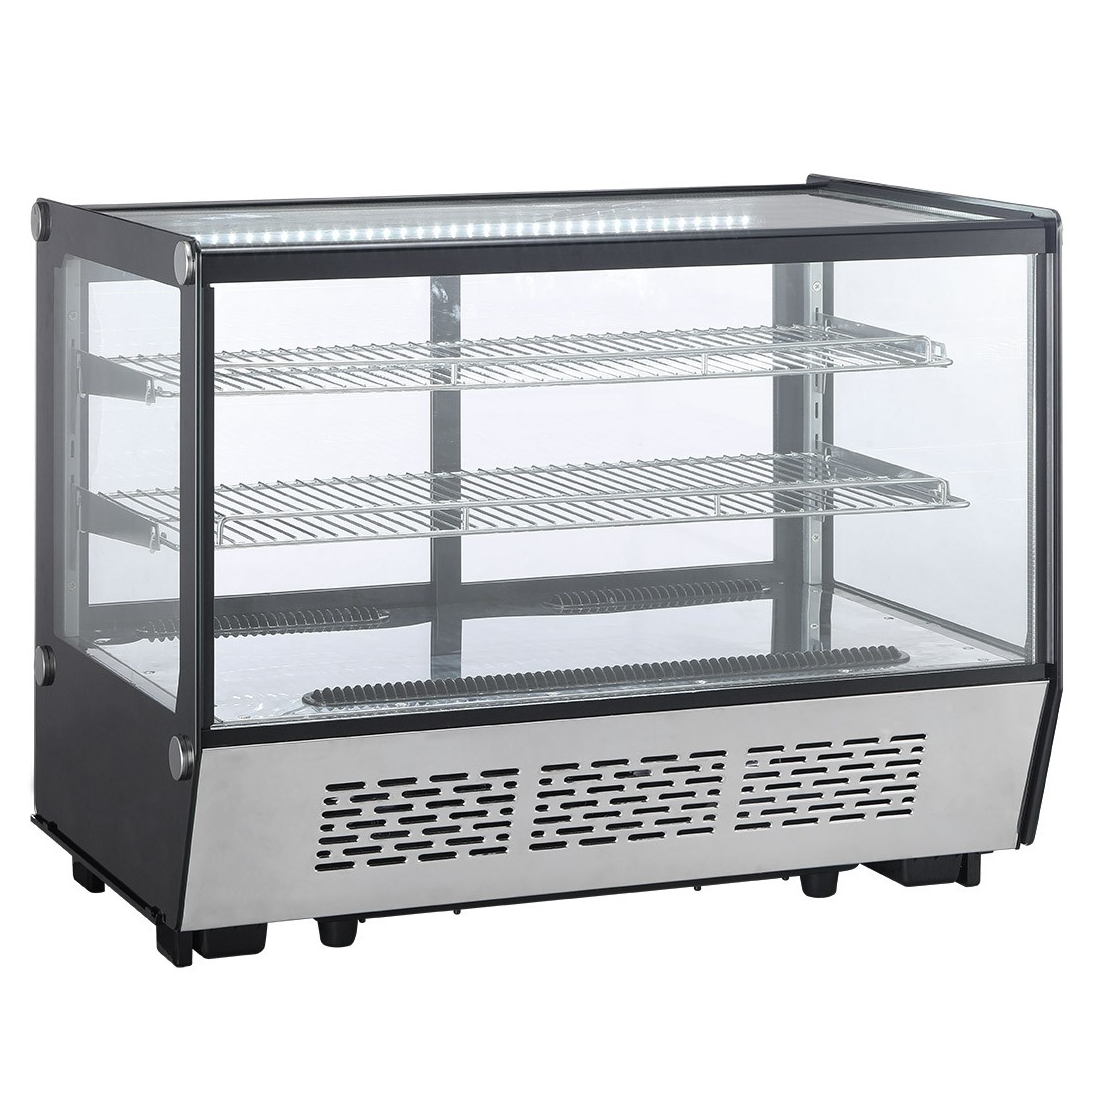 OMAJ XCW-160Z Cake Display Chiller Countertop Straight Glass -90 cm